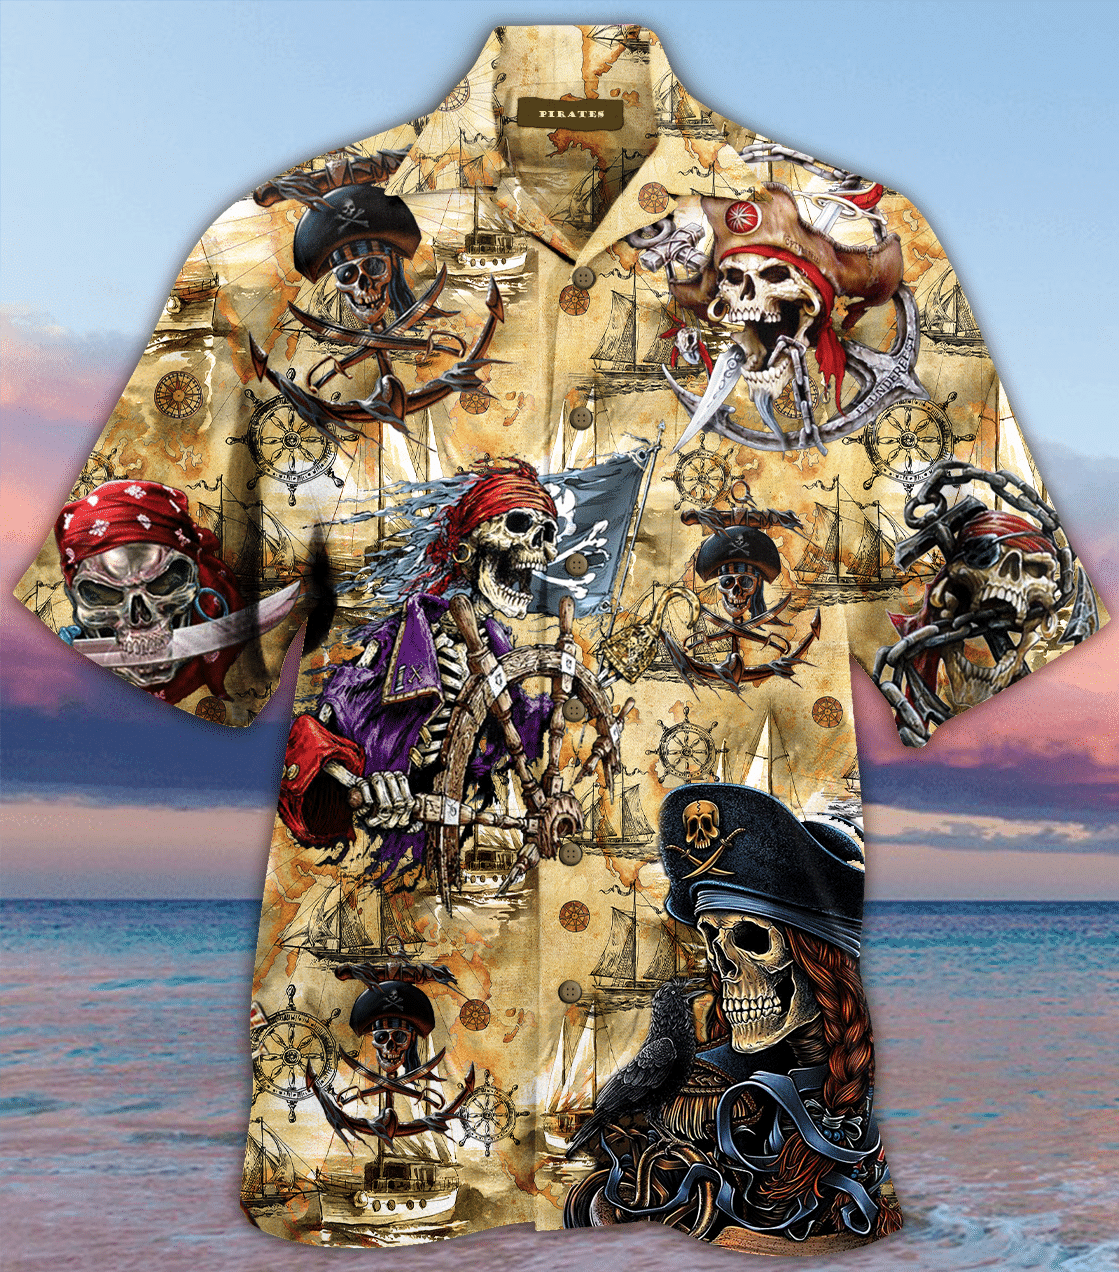 Check Out This Awesome Amazing Pirate Skull Unisex Hawaiian Shirt